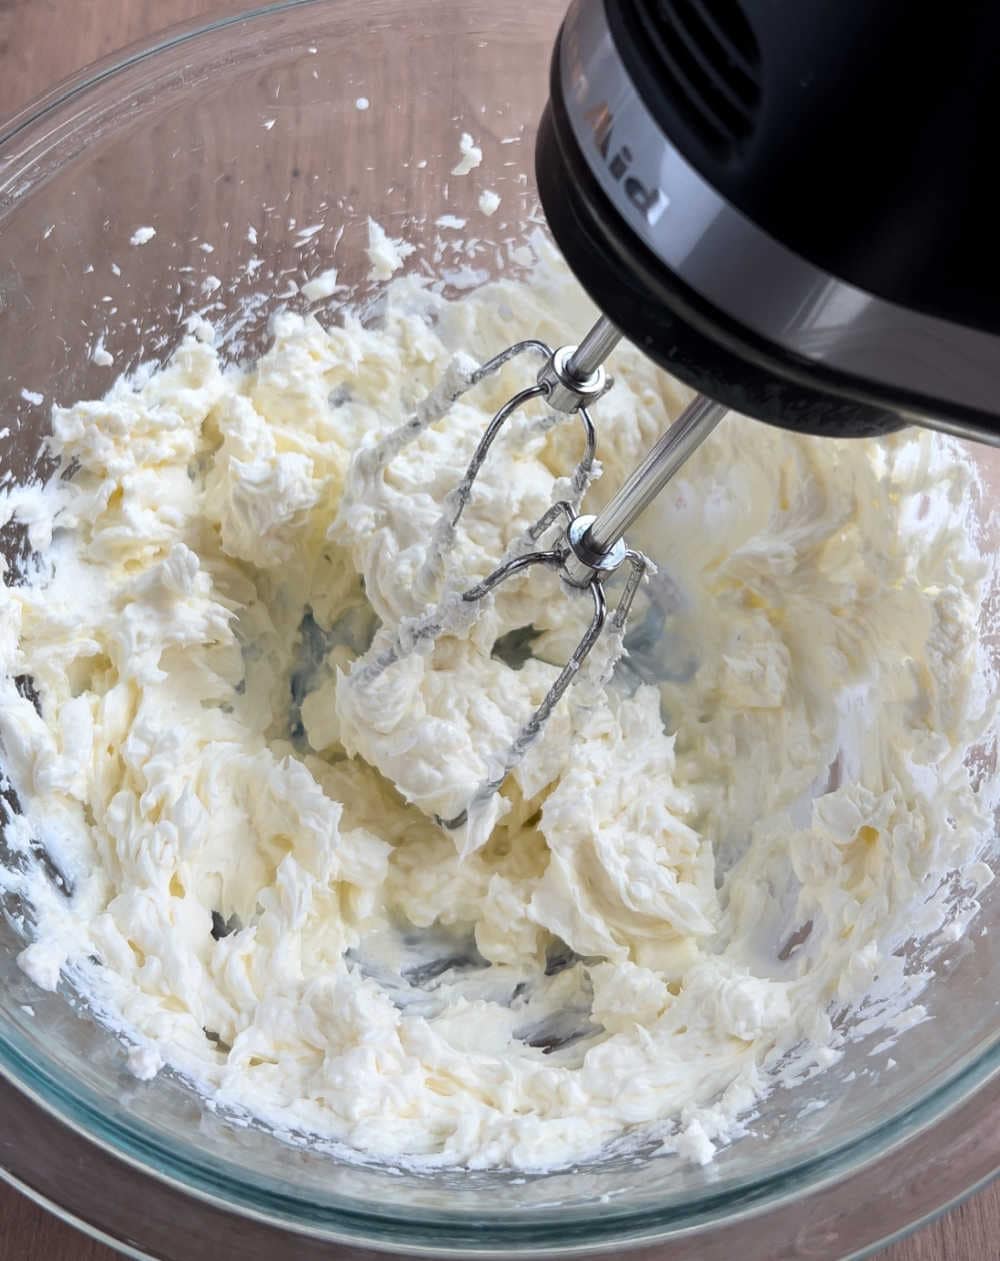 mix cream cheese in mixing bowl.